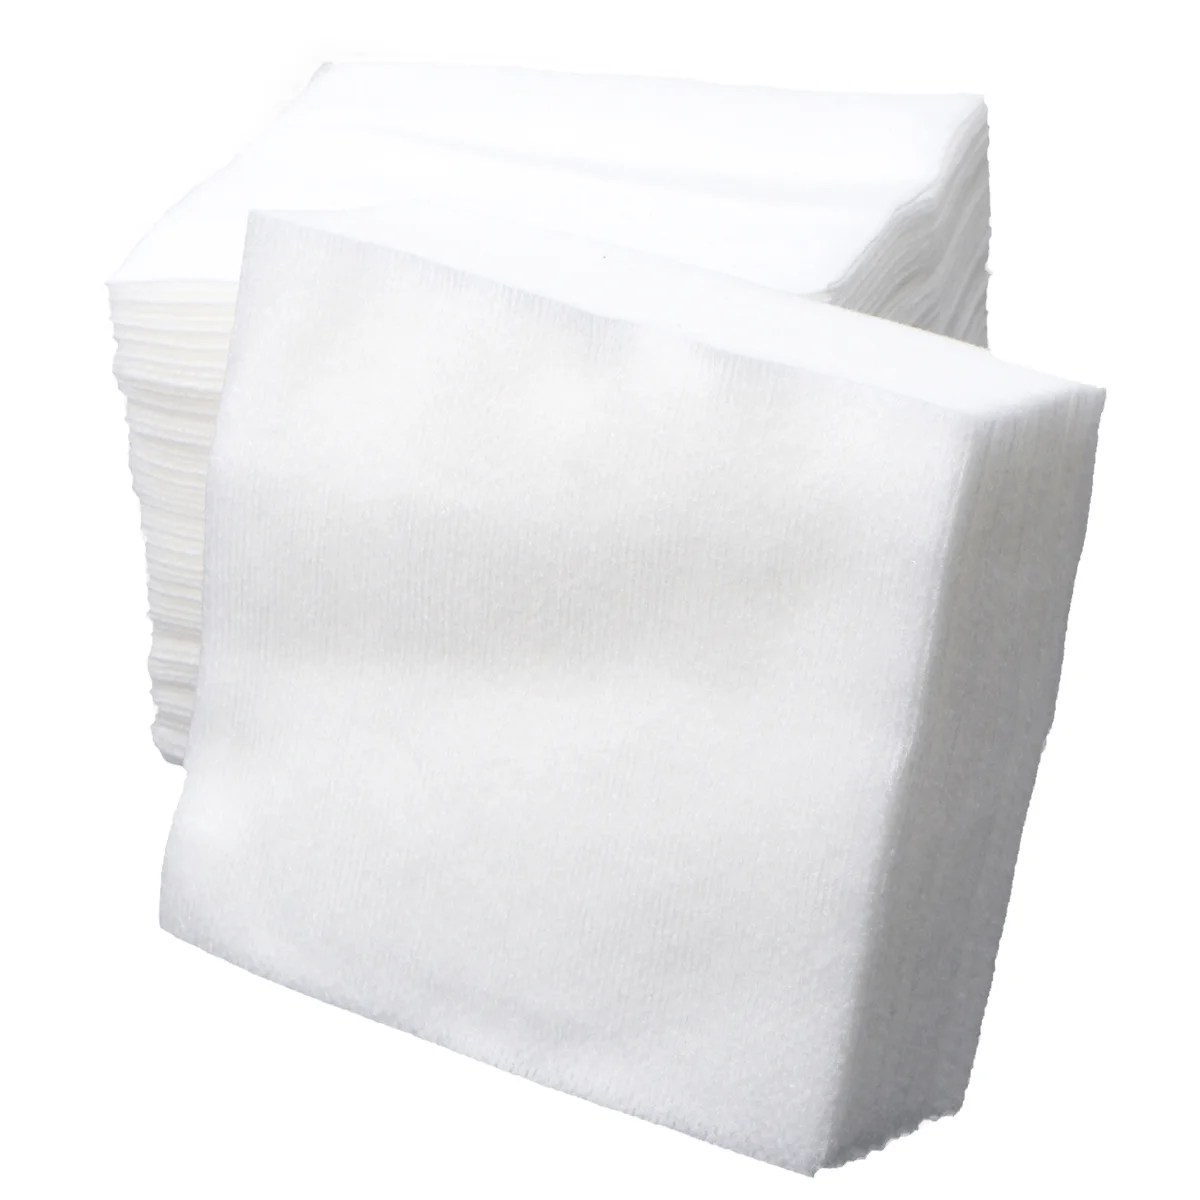 

Gauze Pads Non Woven Cotton Wound Care Sterile Supplies Bandage Makeup Wipes 4X4 Aid First Pad Sponge Sponges Swabs Wounds